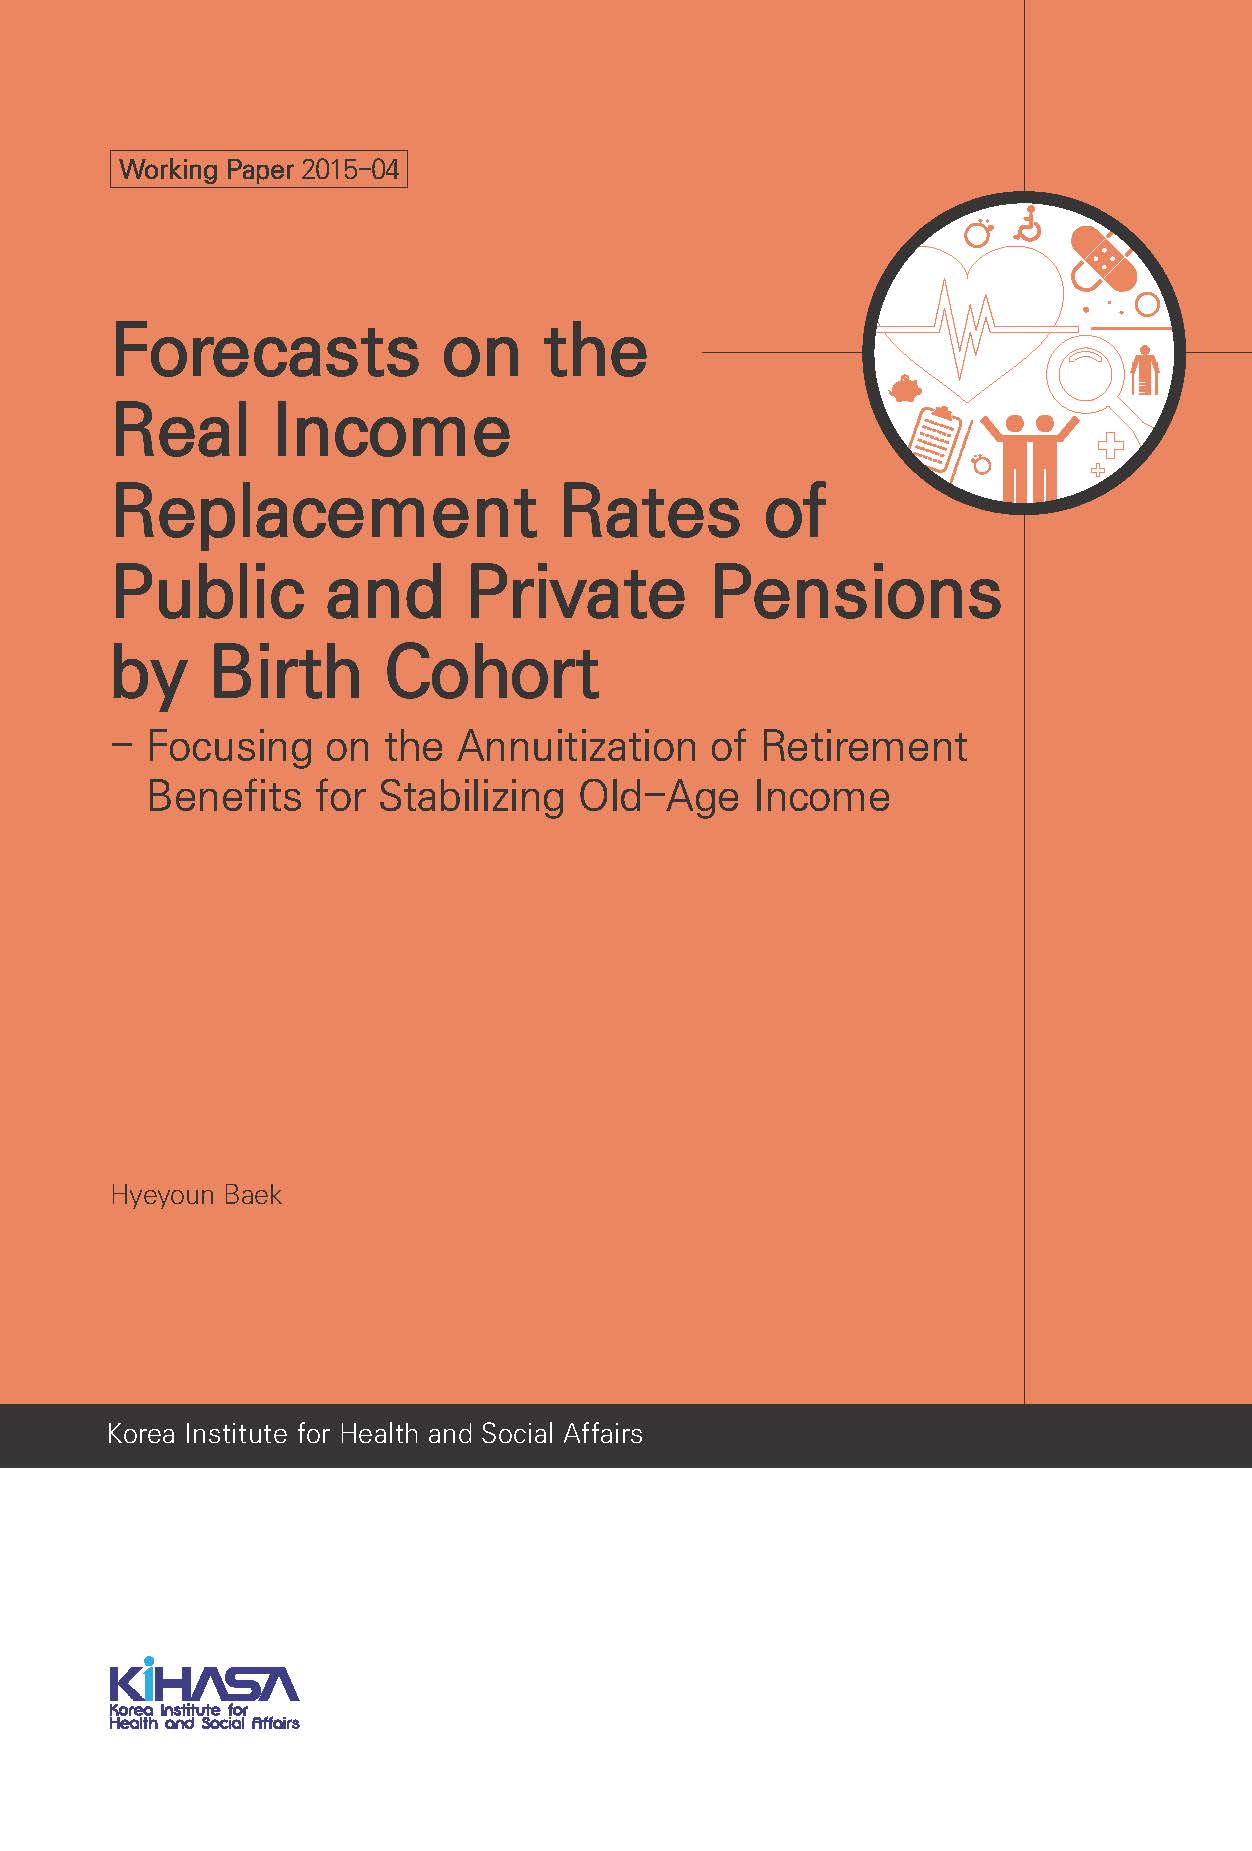 Forecasts on the Real Income Replacement Rates of Public and Private Pensions by Birth Cohort